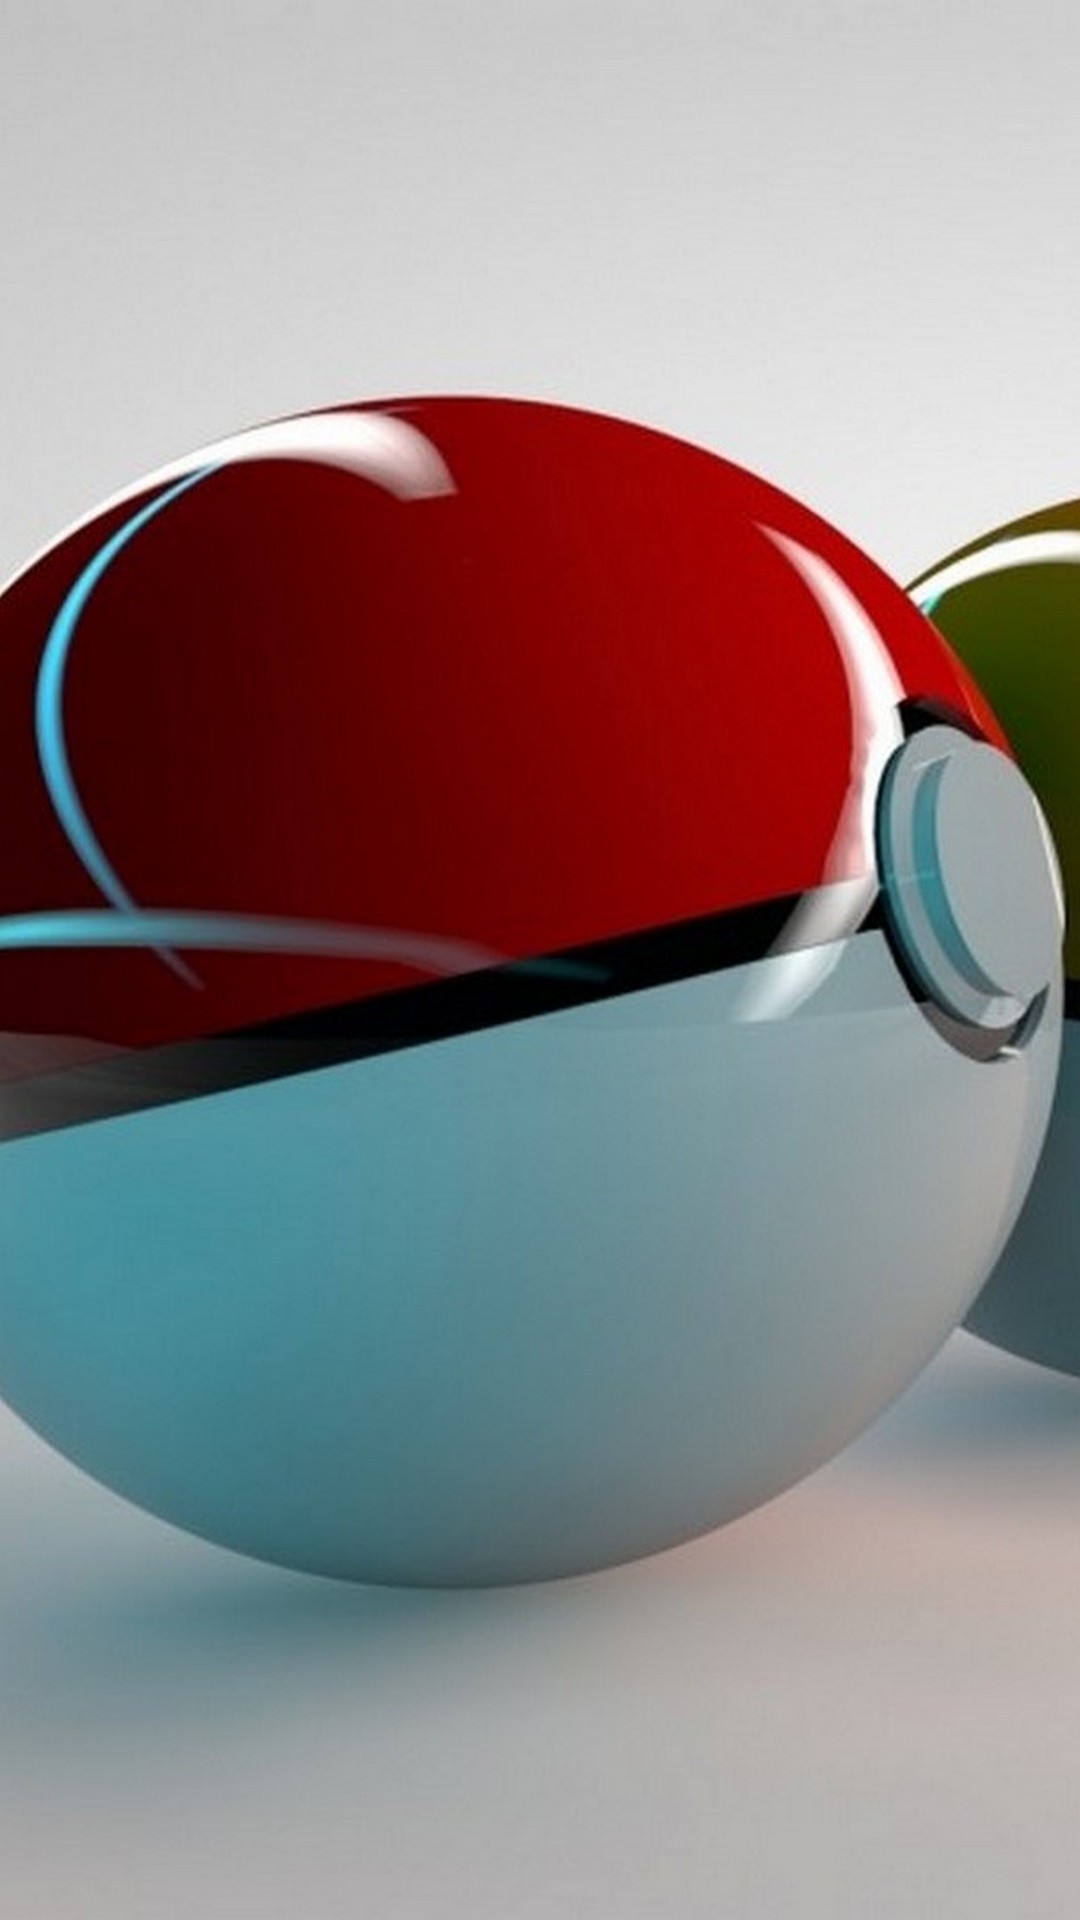 3D Pokemon Ball Wallpaper Android with HD resolution 1080x1920